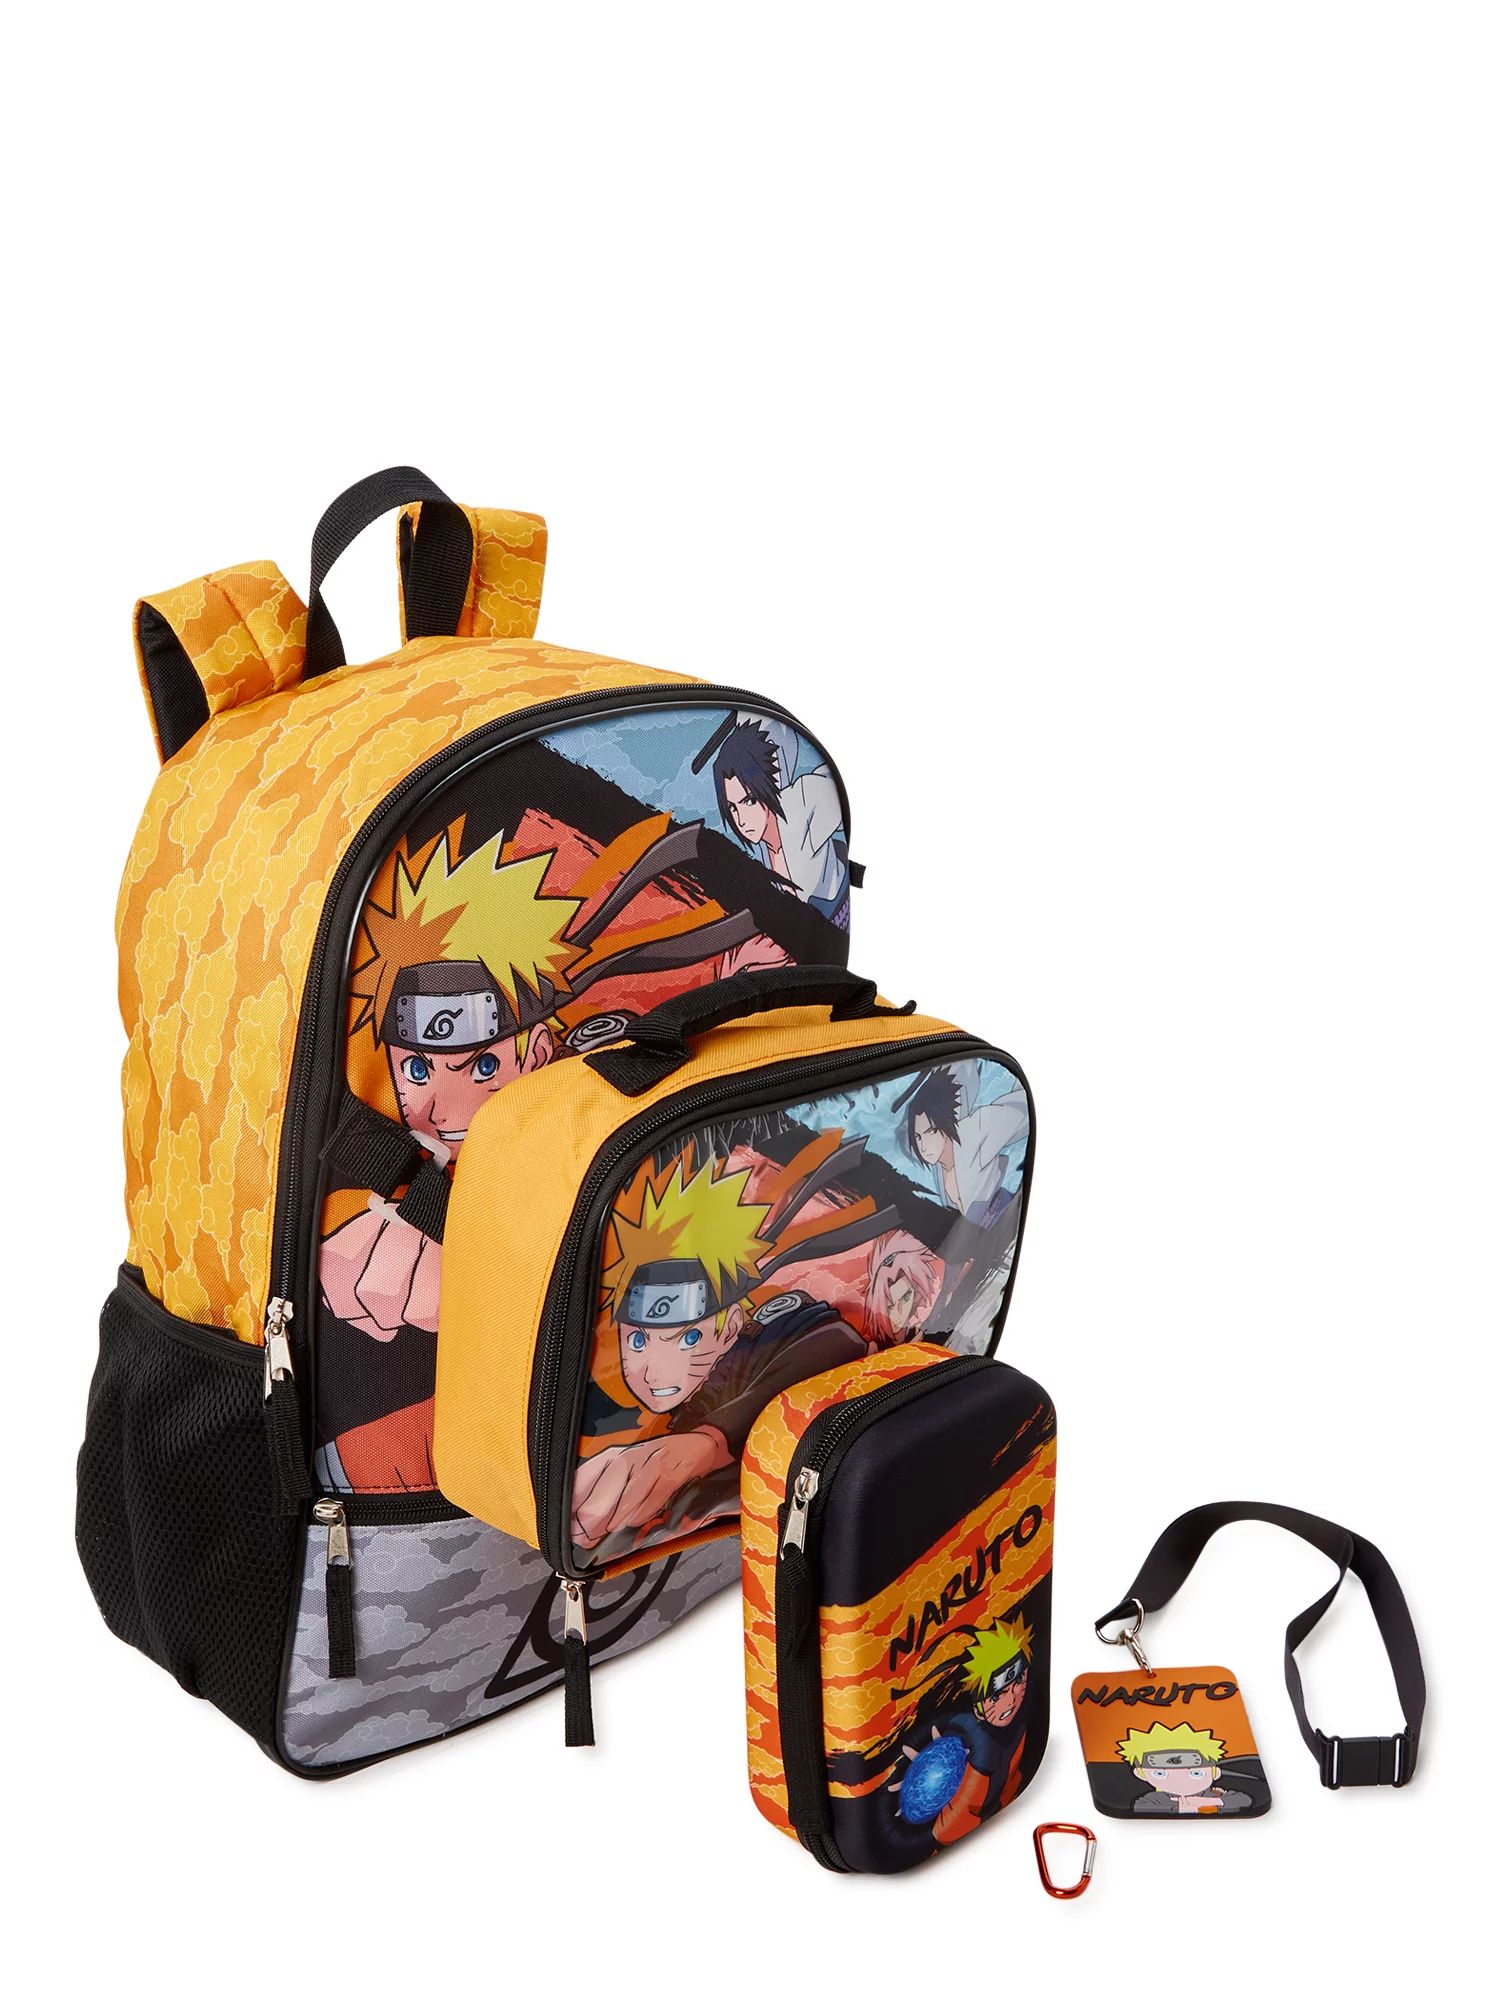 Naruto Shippuden Kids’ Backpack with Lunch Bag 4-Piece Set Multi-Color | Walmart (US)